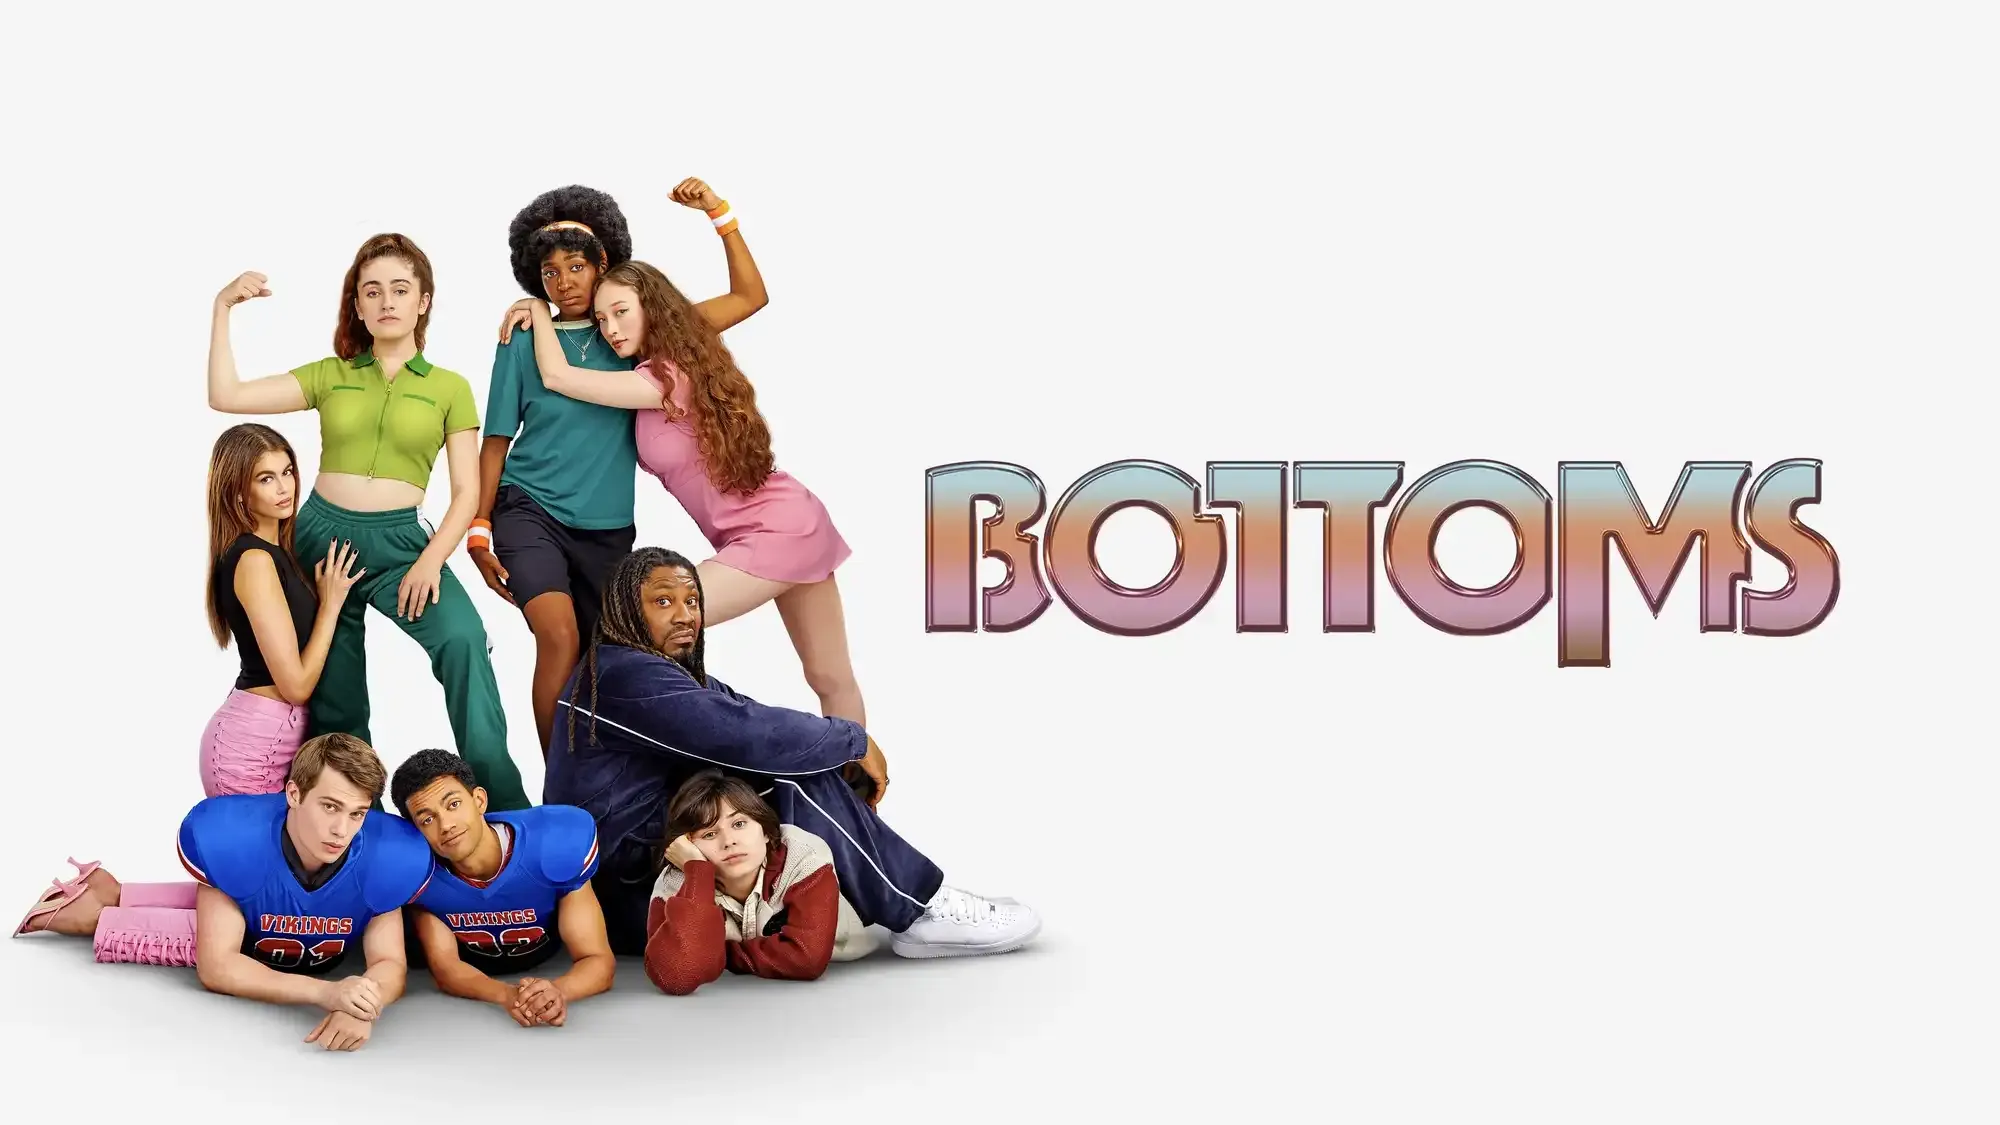 Bottoms movie review